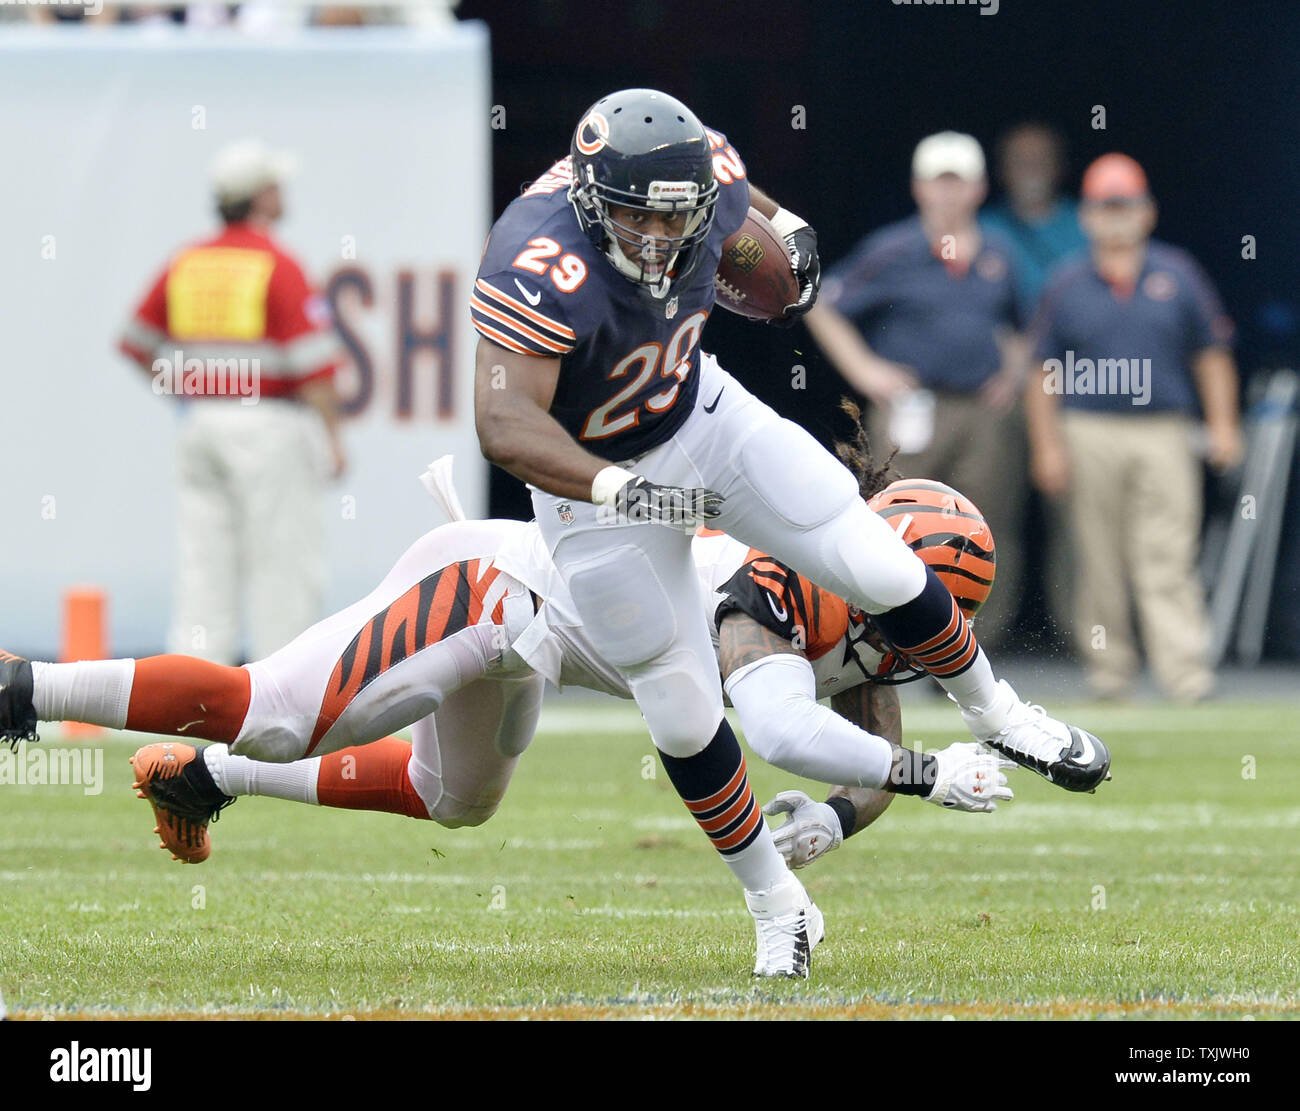 Chicago Bears running back Michael Bush runs for a 7-yard gain during the fourth quarter against the Cincinnati Bengals at Soldier Field in Chicago on September 8, 2013. The Bears defeated the Bengals 24-21.     UPI/Brian Kersey Stock Photo